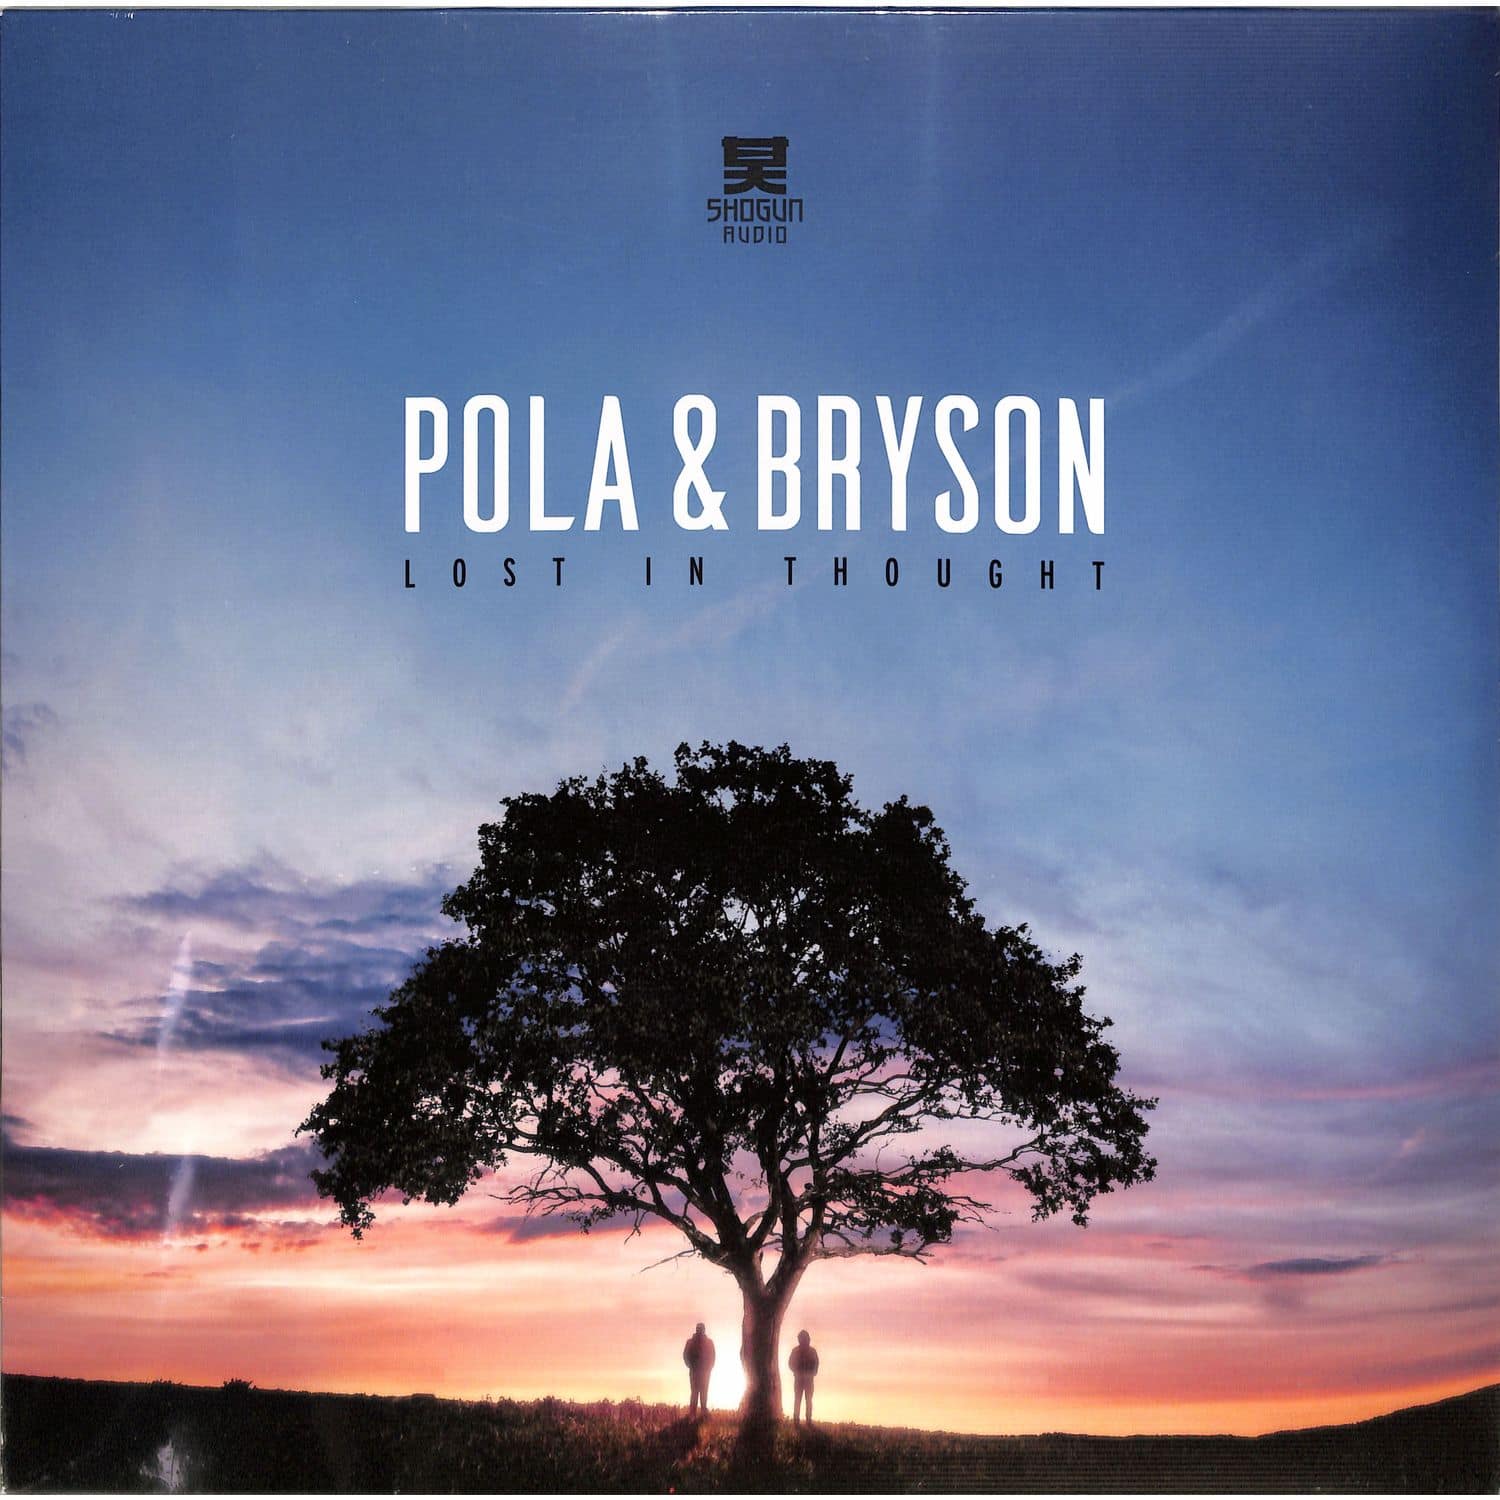 Pola & Bryson - LOST IN THOUGHT 